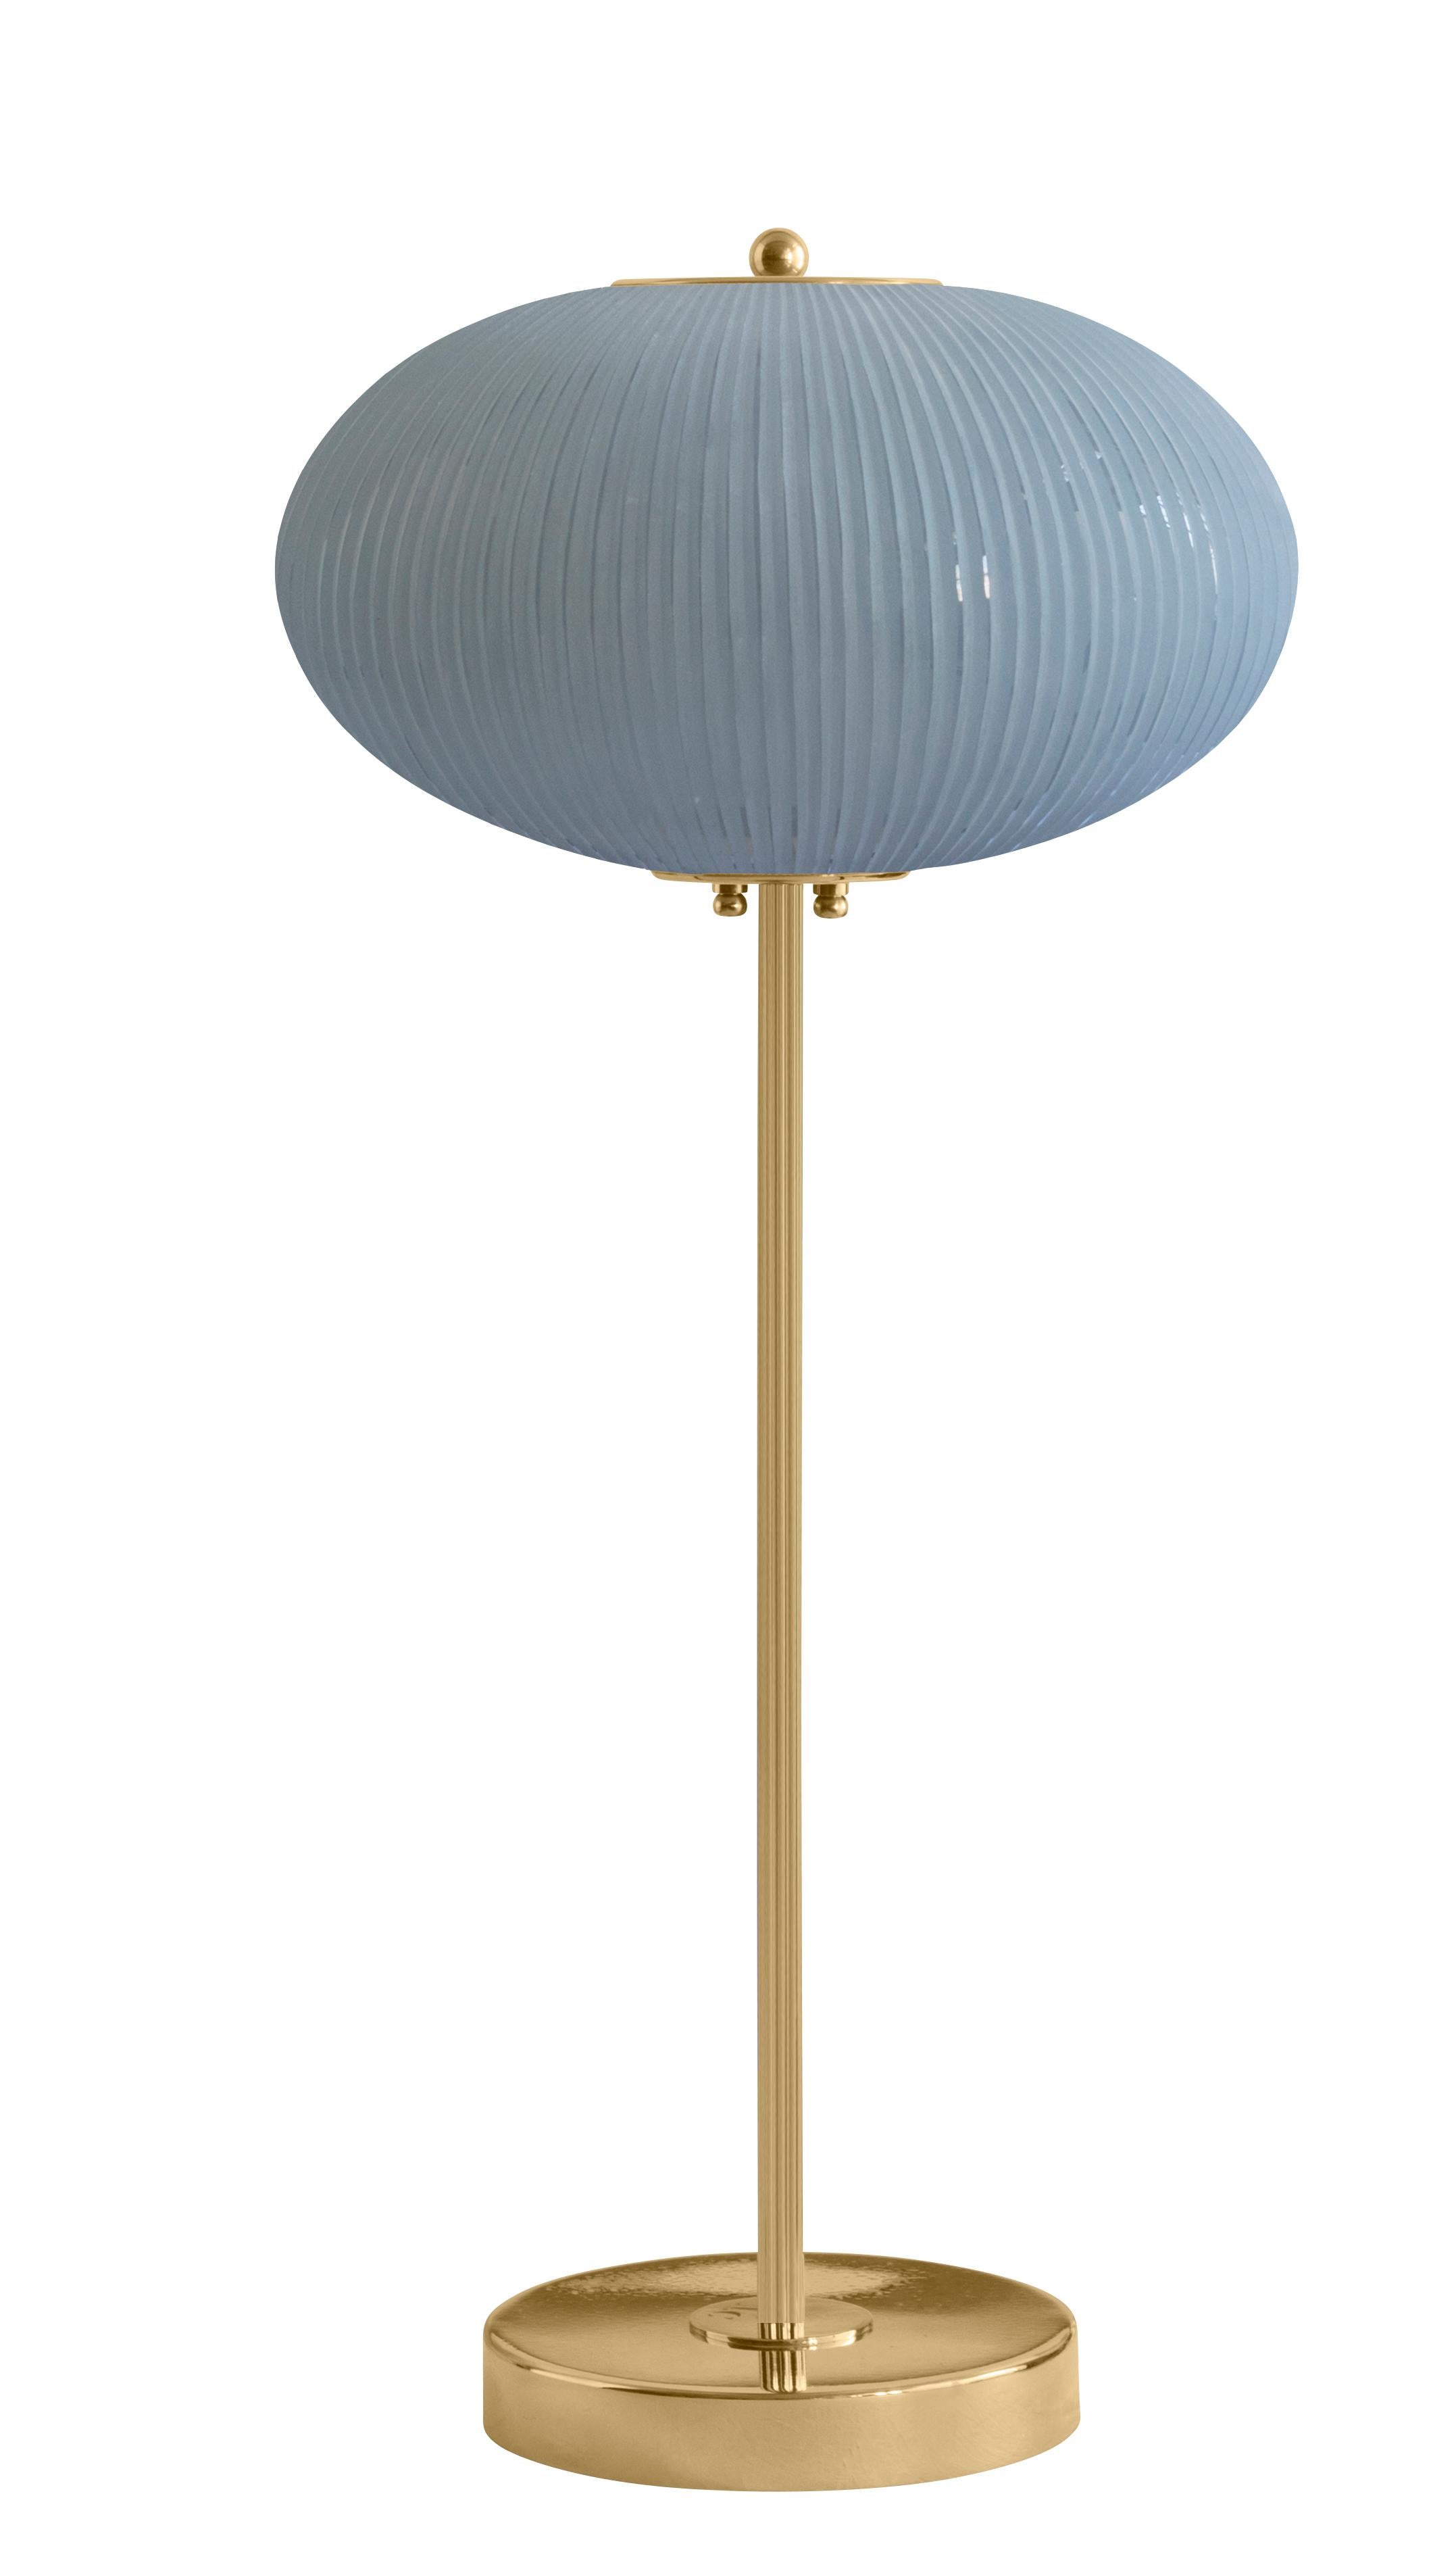 Table lamp China 07 by Magic Circus Editions
Dimensions: H 70 x W 32 x D 32 cm
Materials: Brass, mouth blown glass sculpted with a diamond saw
Color: opal grey

Available finishes: Brass, nickel
Available colours: enamel soft white, soft rose,